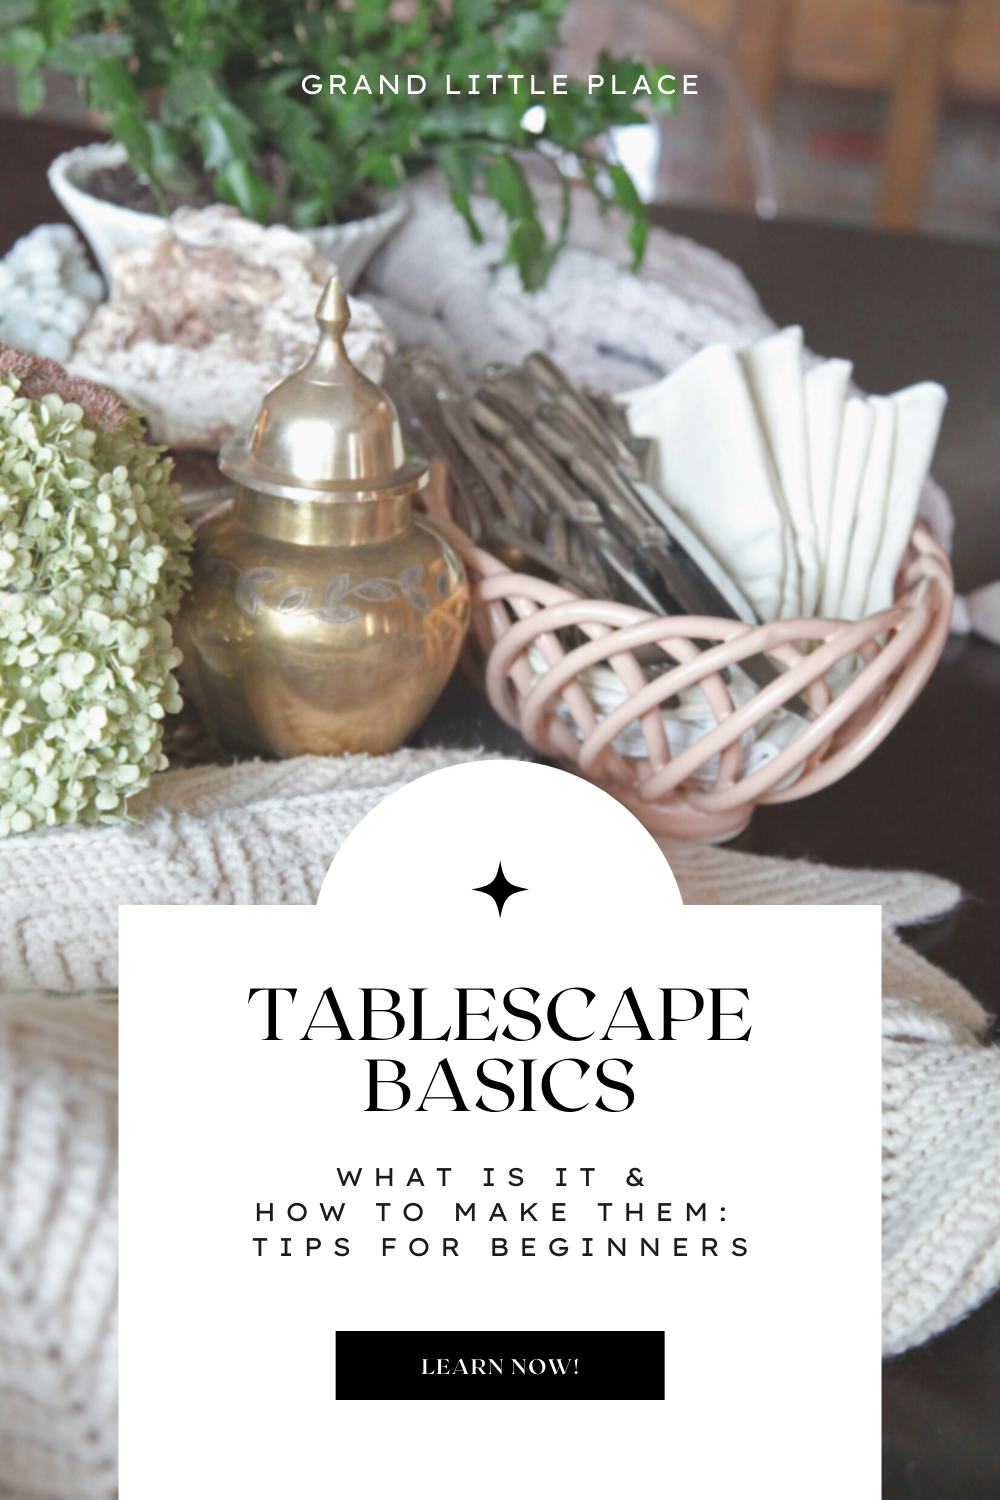 How to create tablescapes